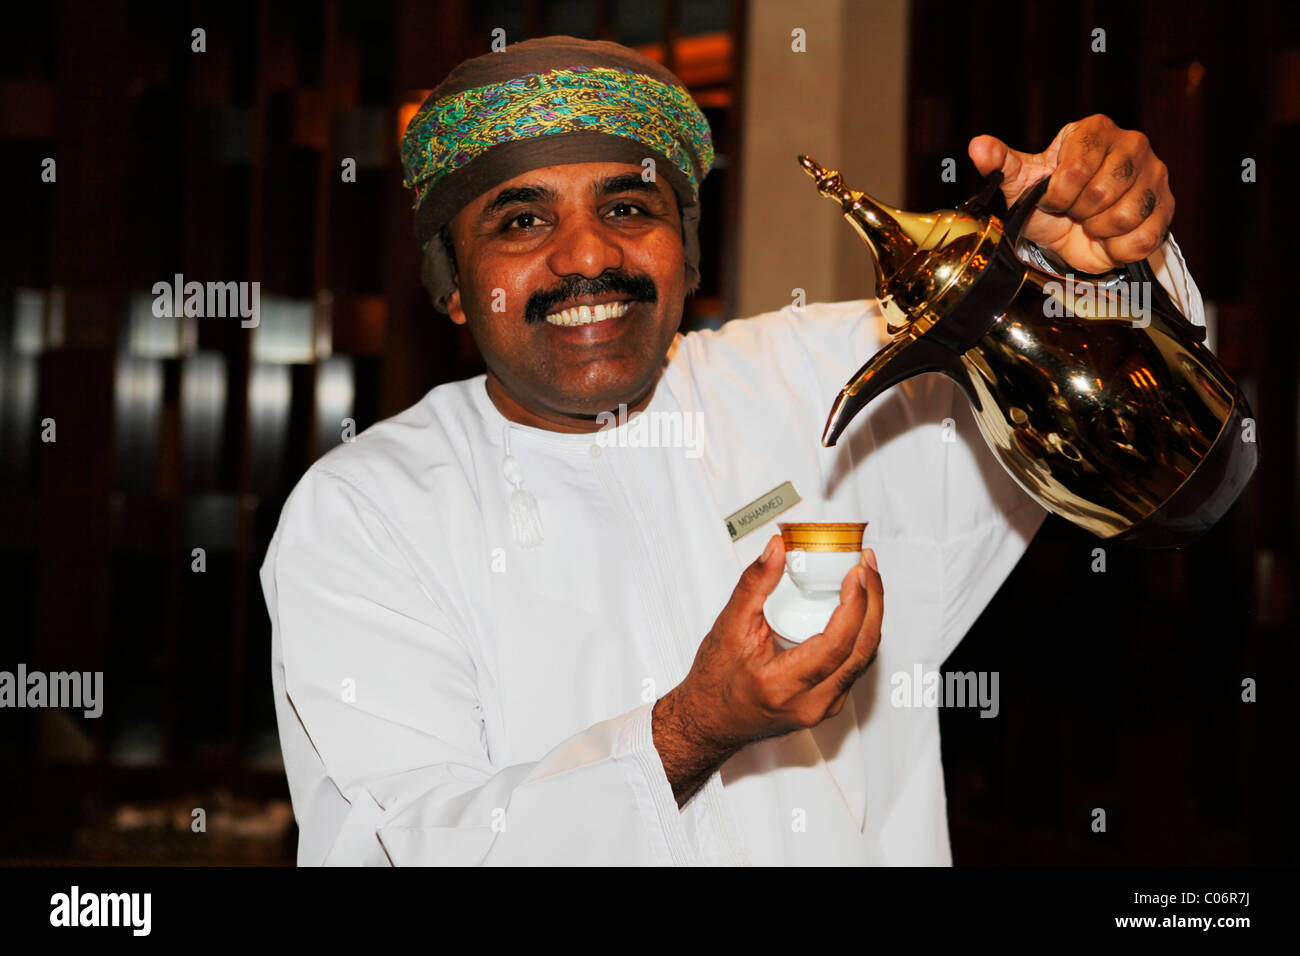 An Omani man serves Arabian coffee from a pot known as a Dallah in Muscat, Oman. Stock Photo